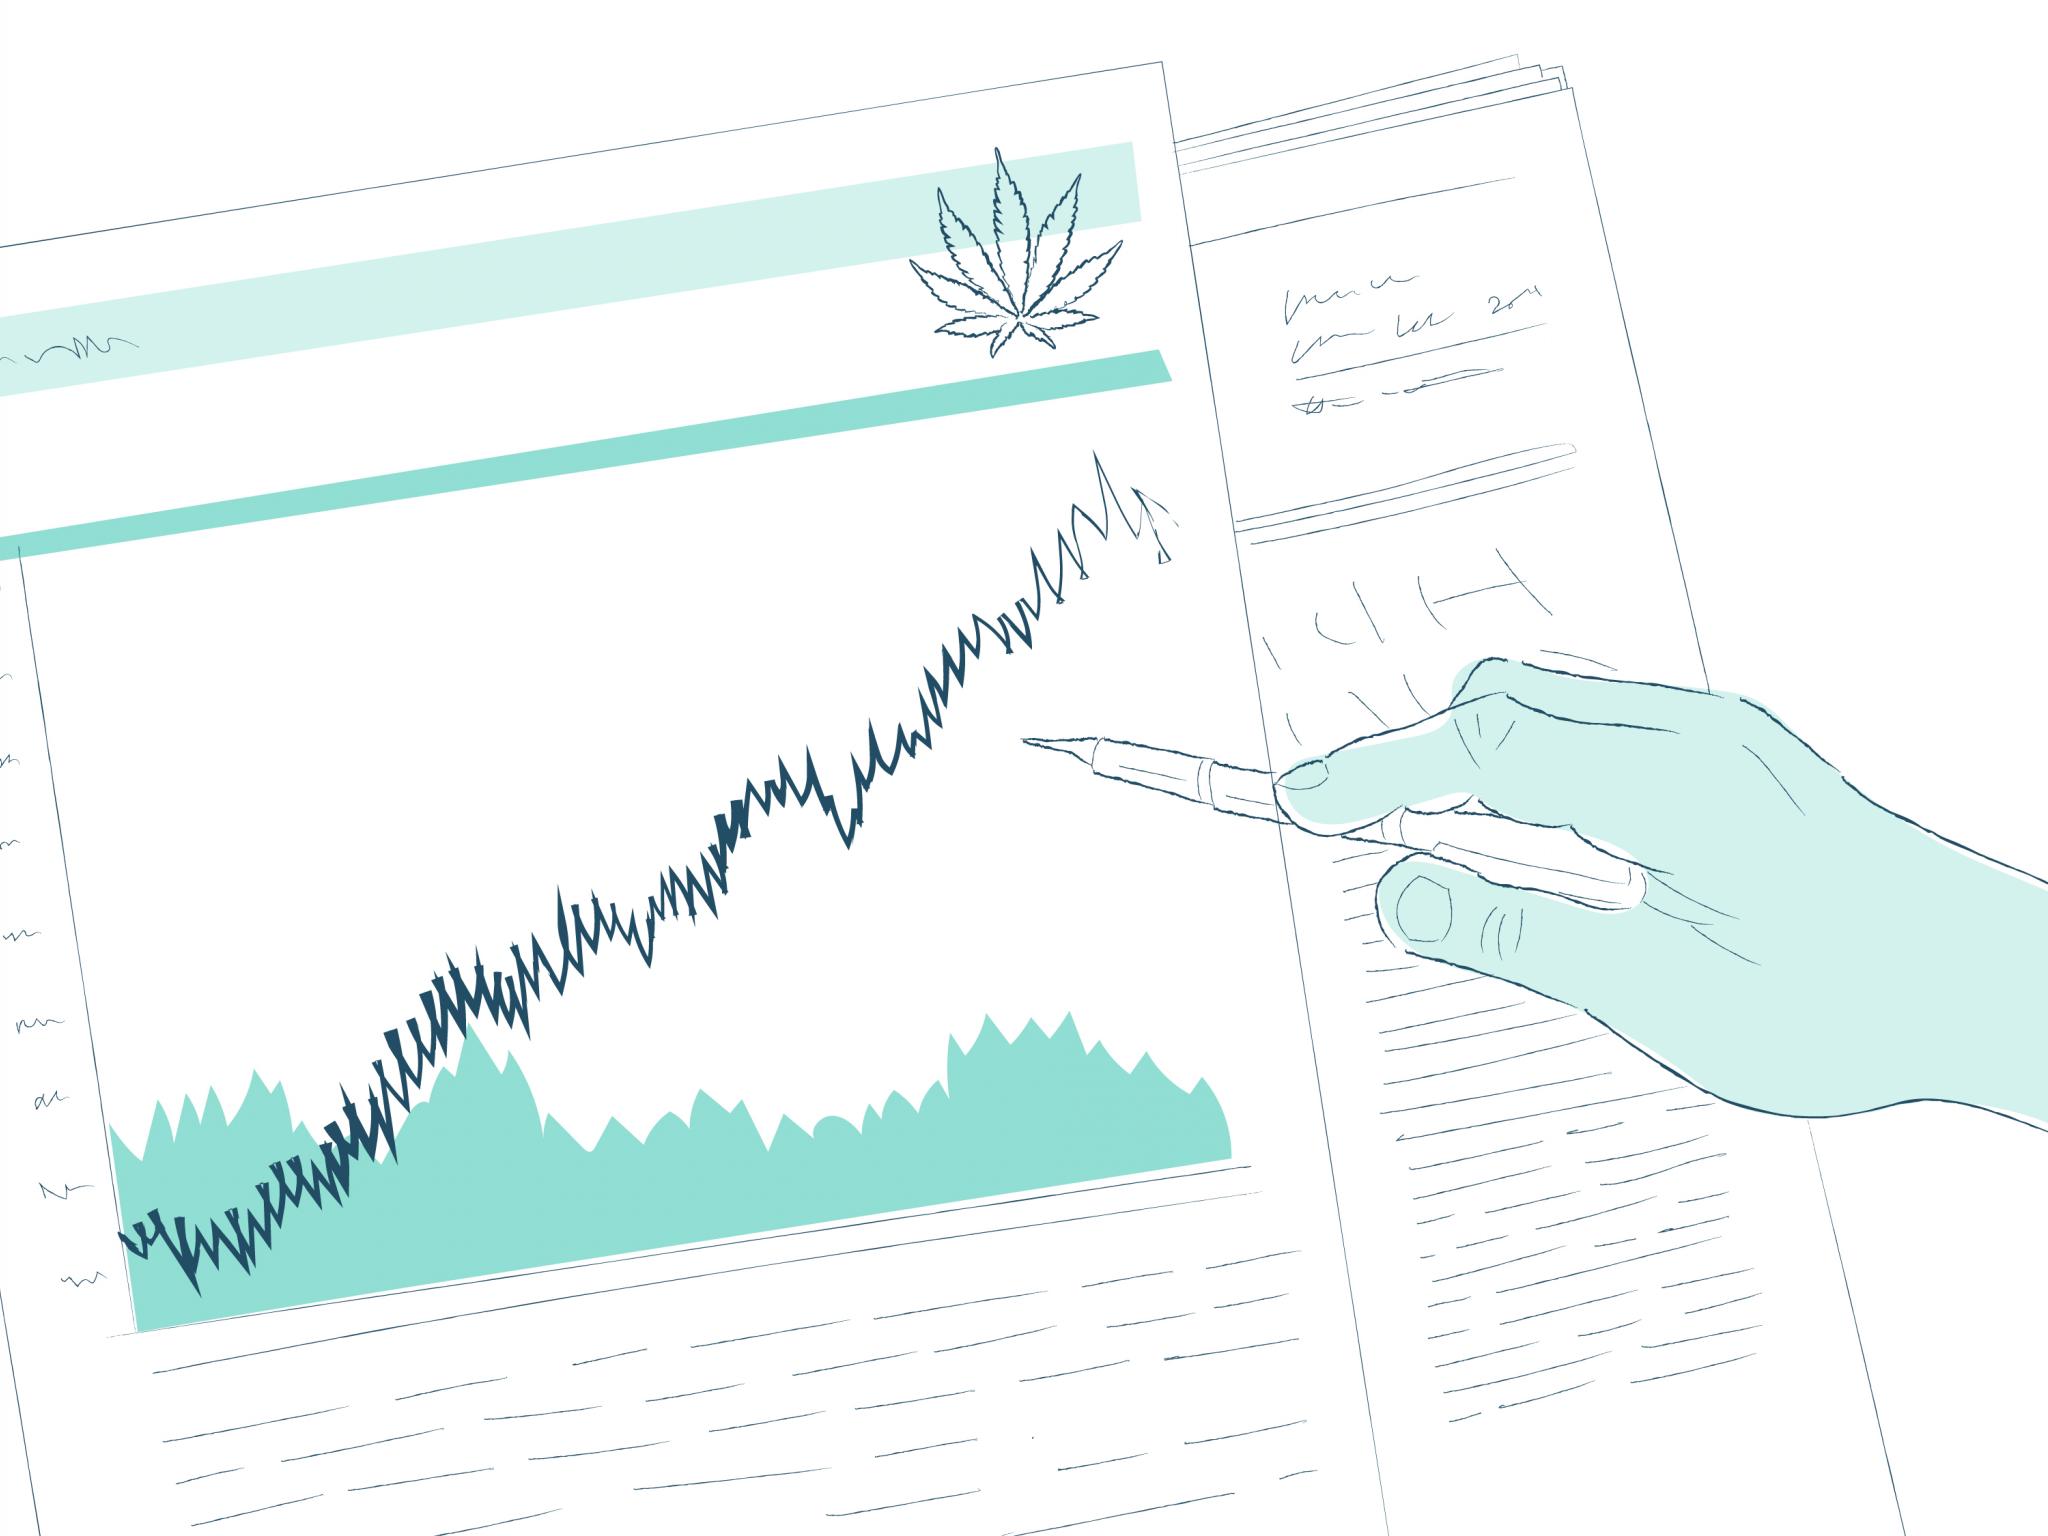  cannabis-stock-gainers-and-losers-from-june-21-2021 